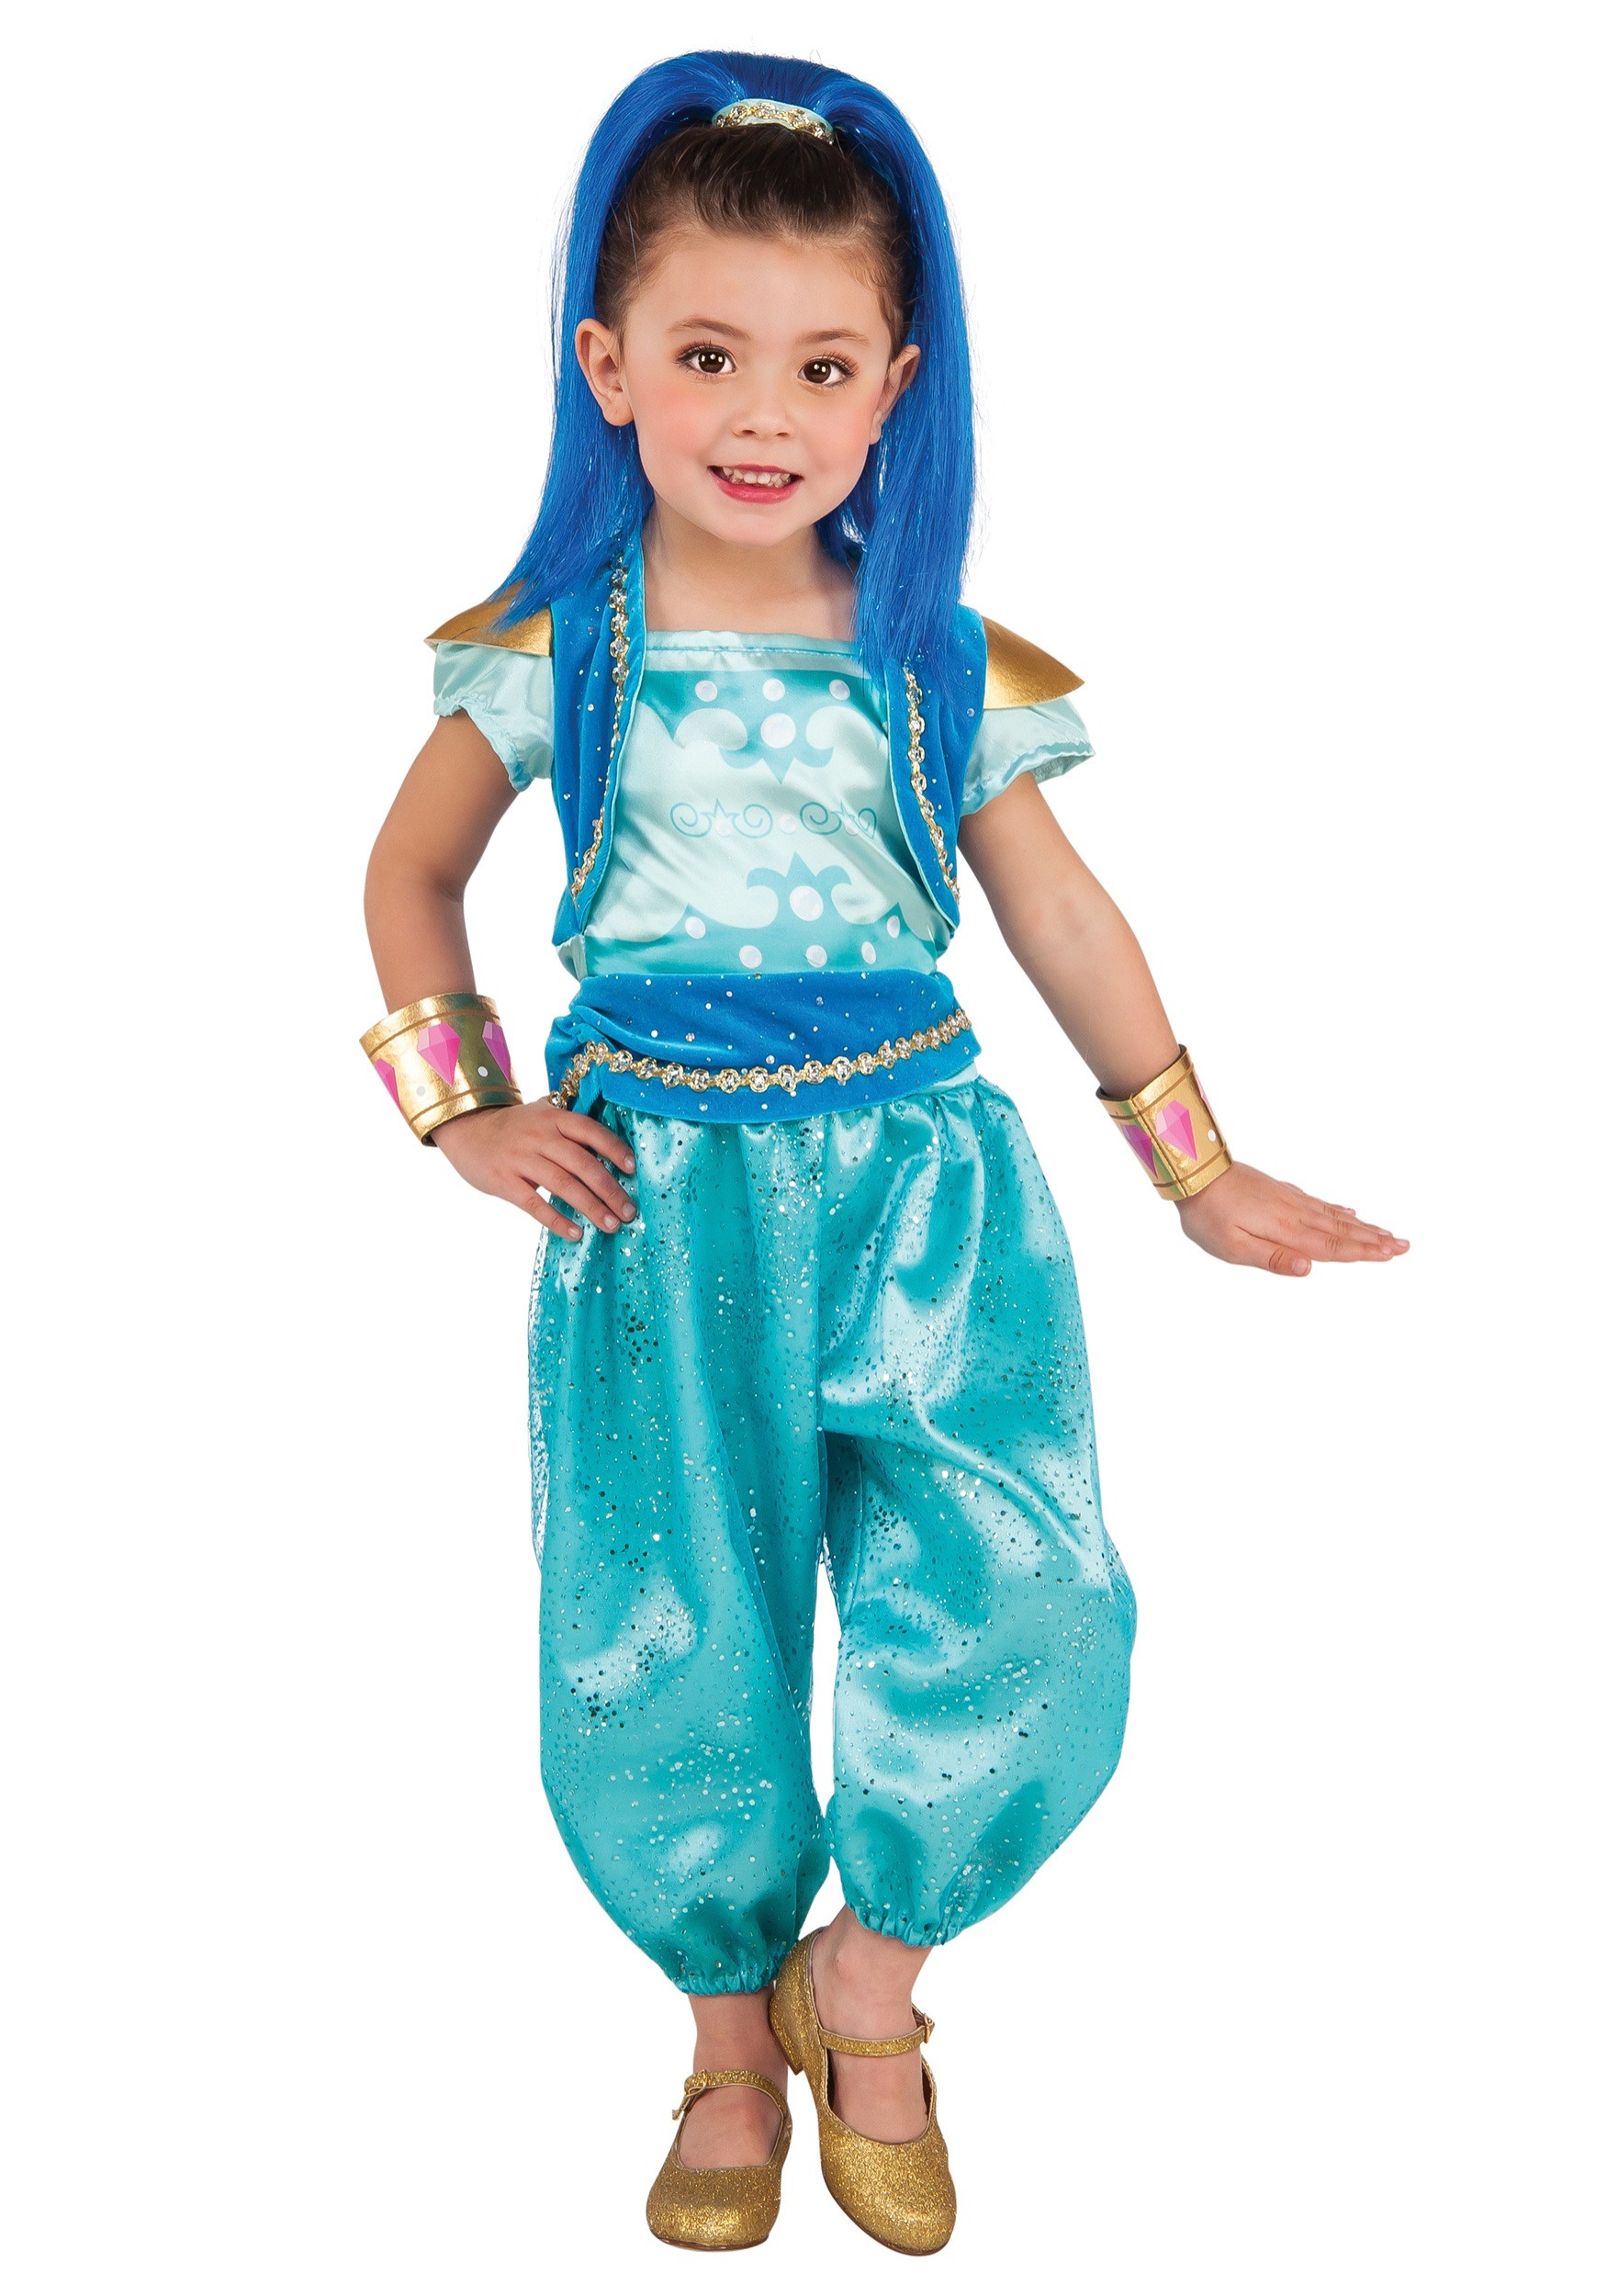 Girls Deluxe Shine Costume from Shimmer and Shine